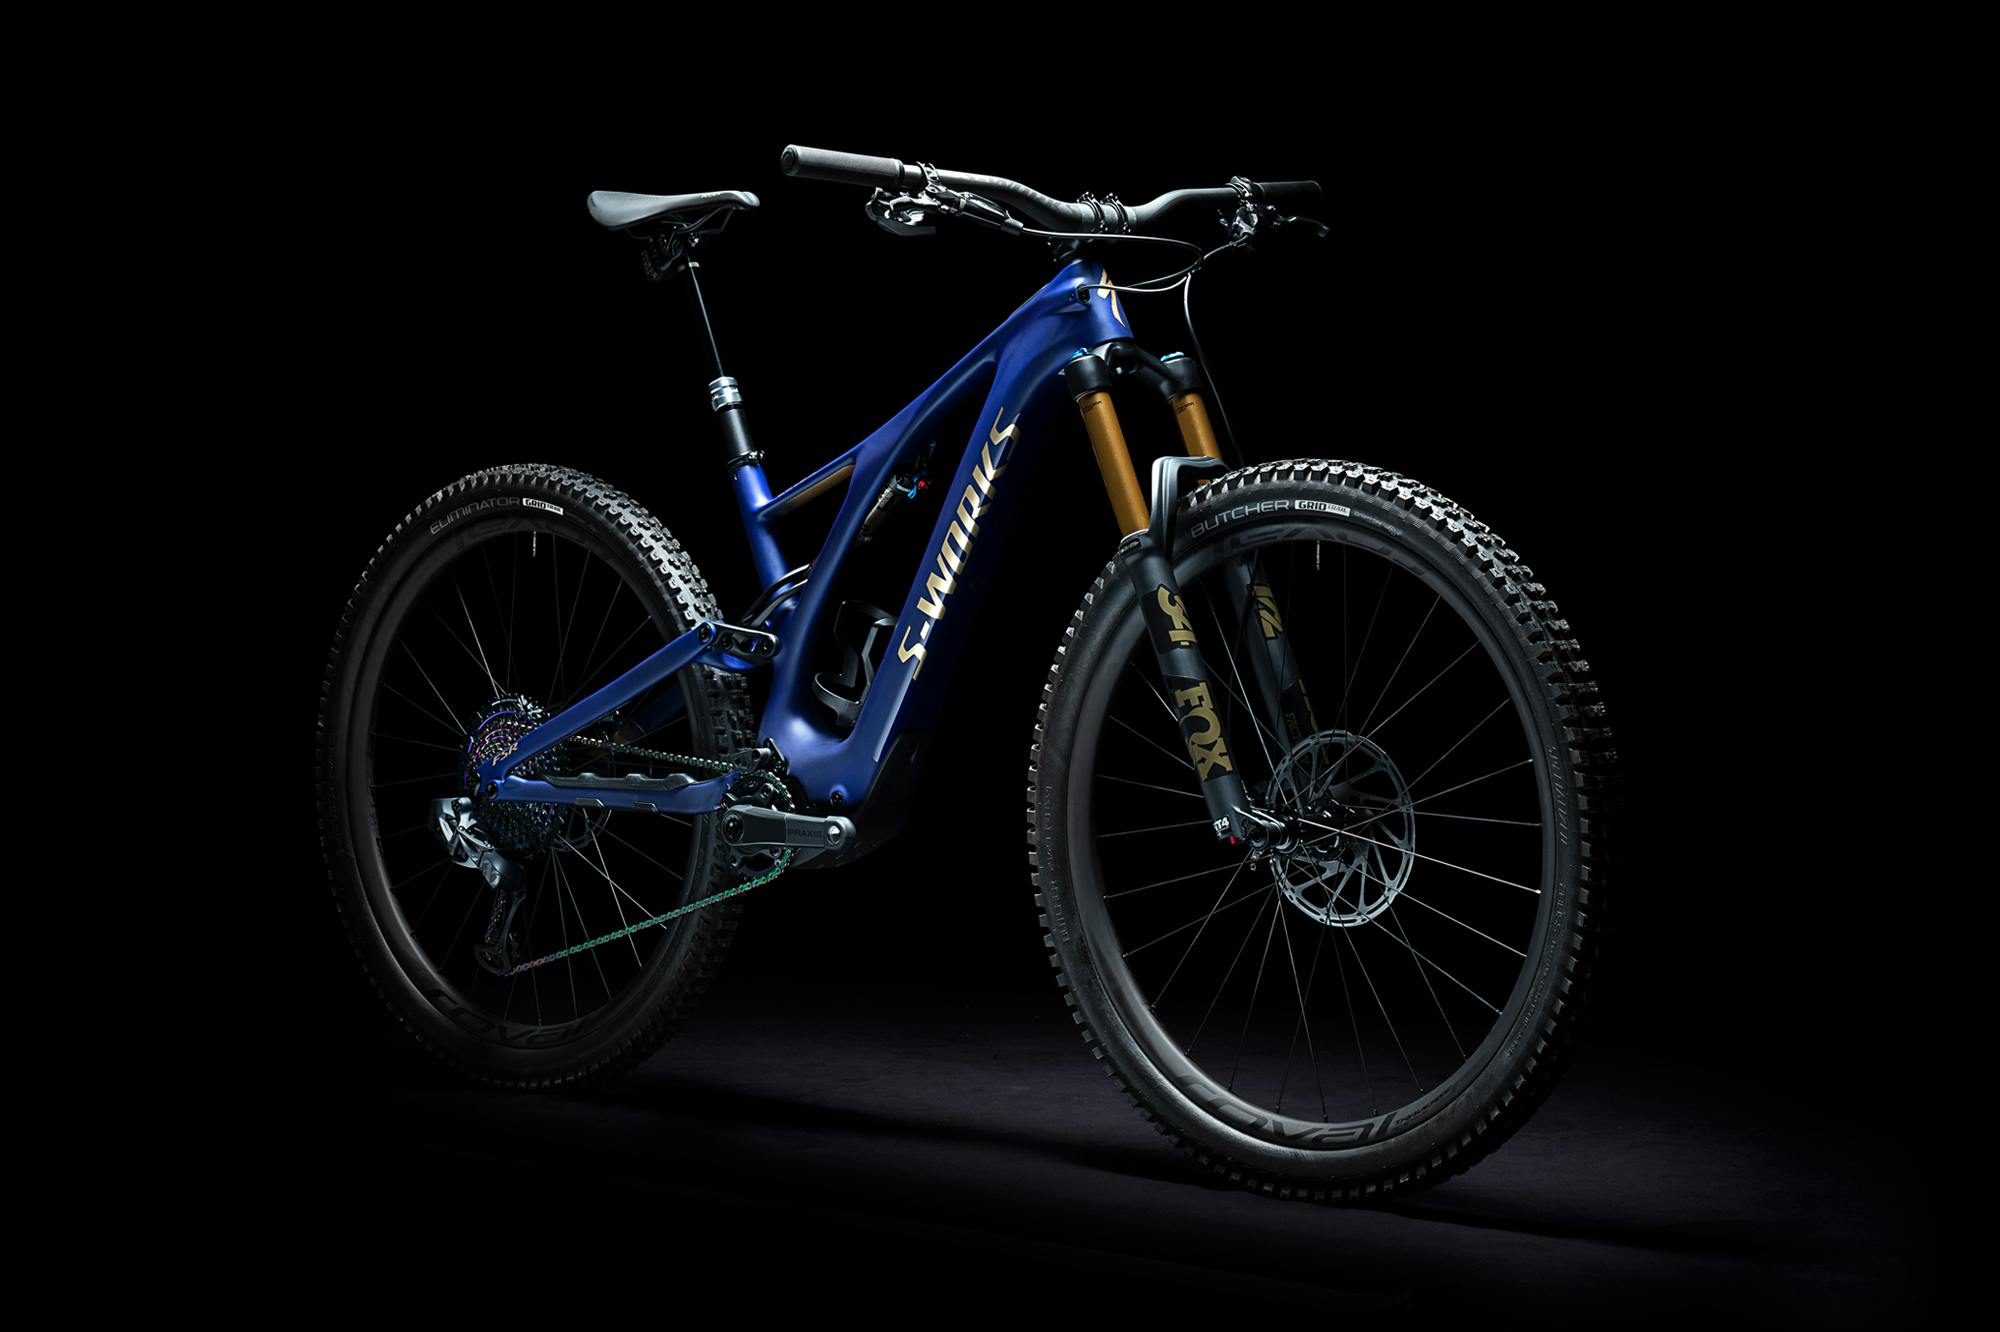 Specialized's Turbo Levo SL Founder’s Edition e-mountain bike against a black background.